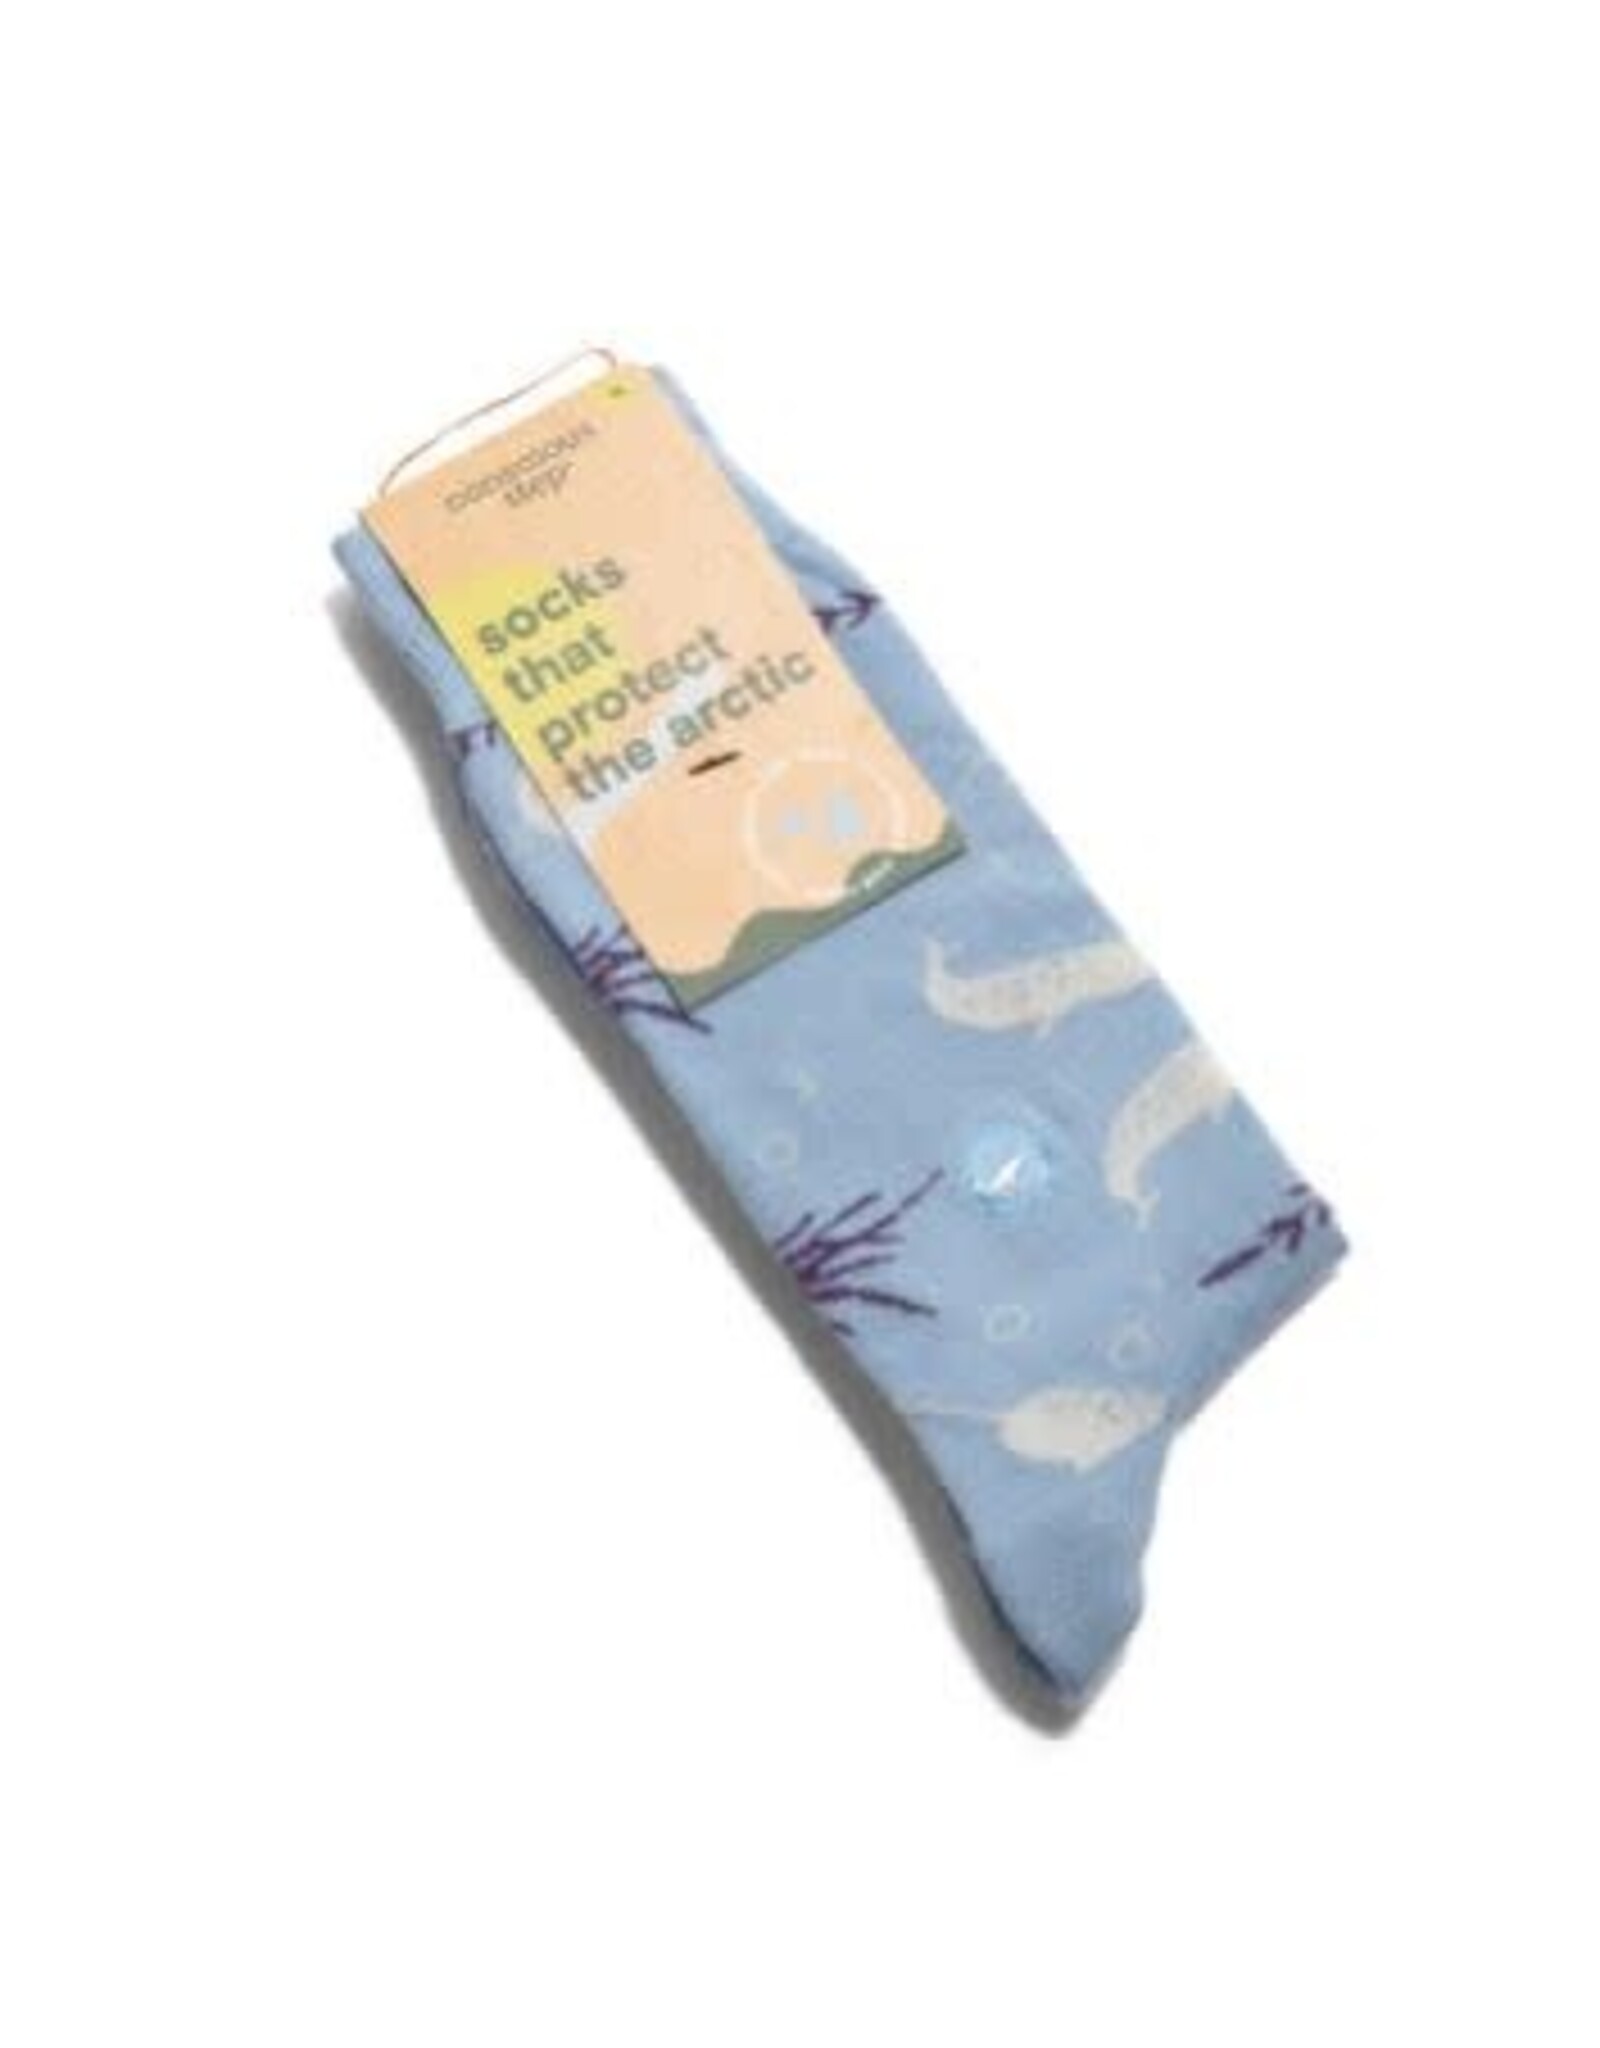 India Crew Socks That Protect The Arctic - Narwhal